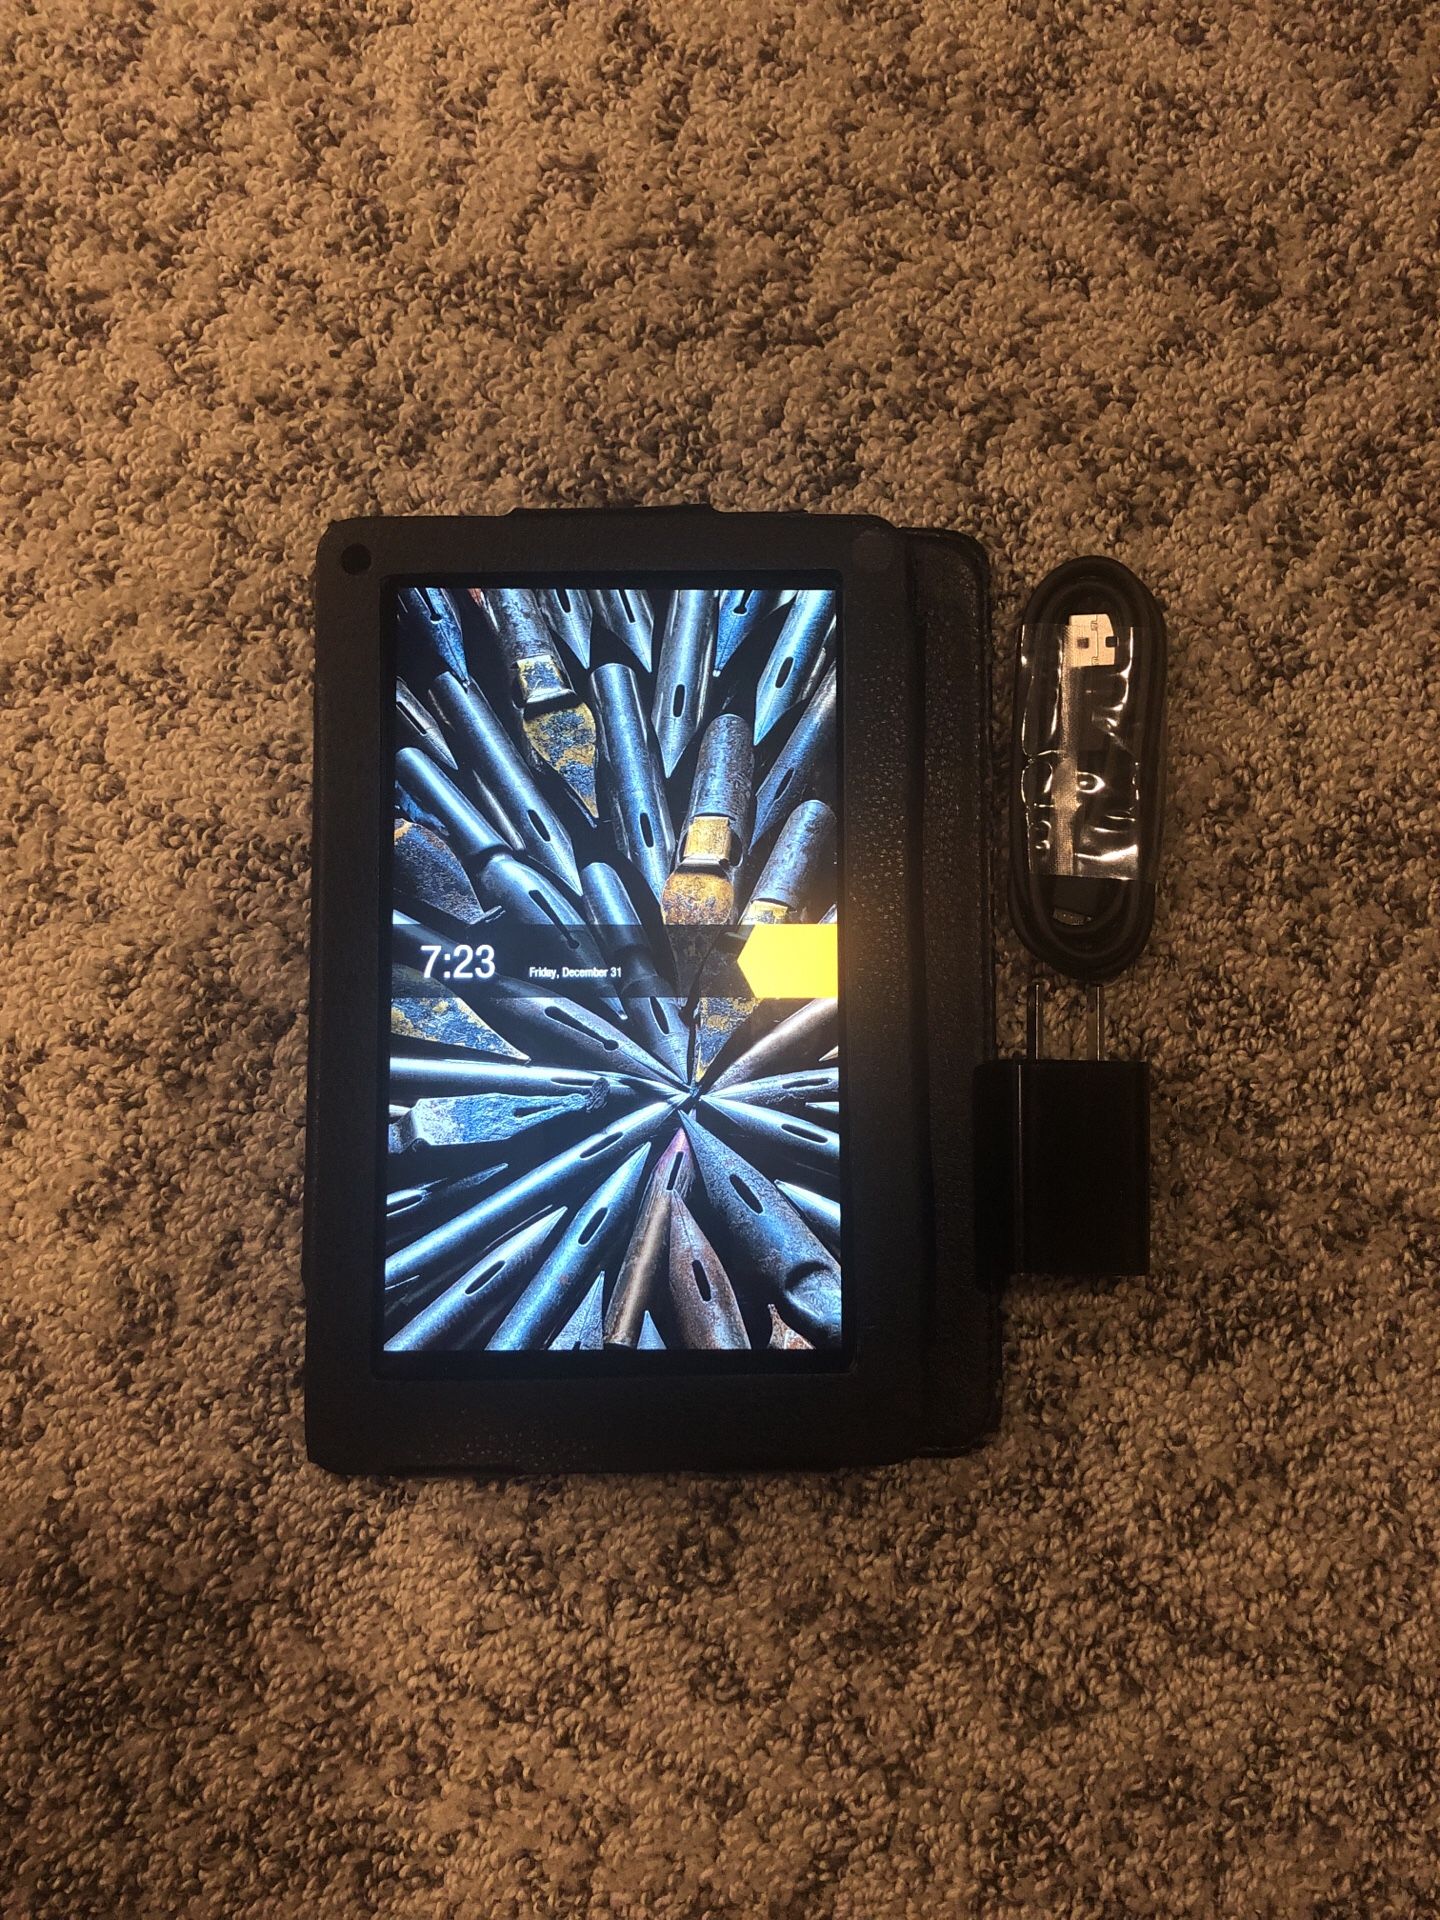 Kindle Fire first Gen